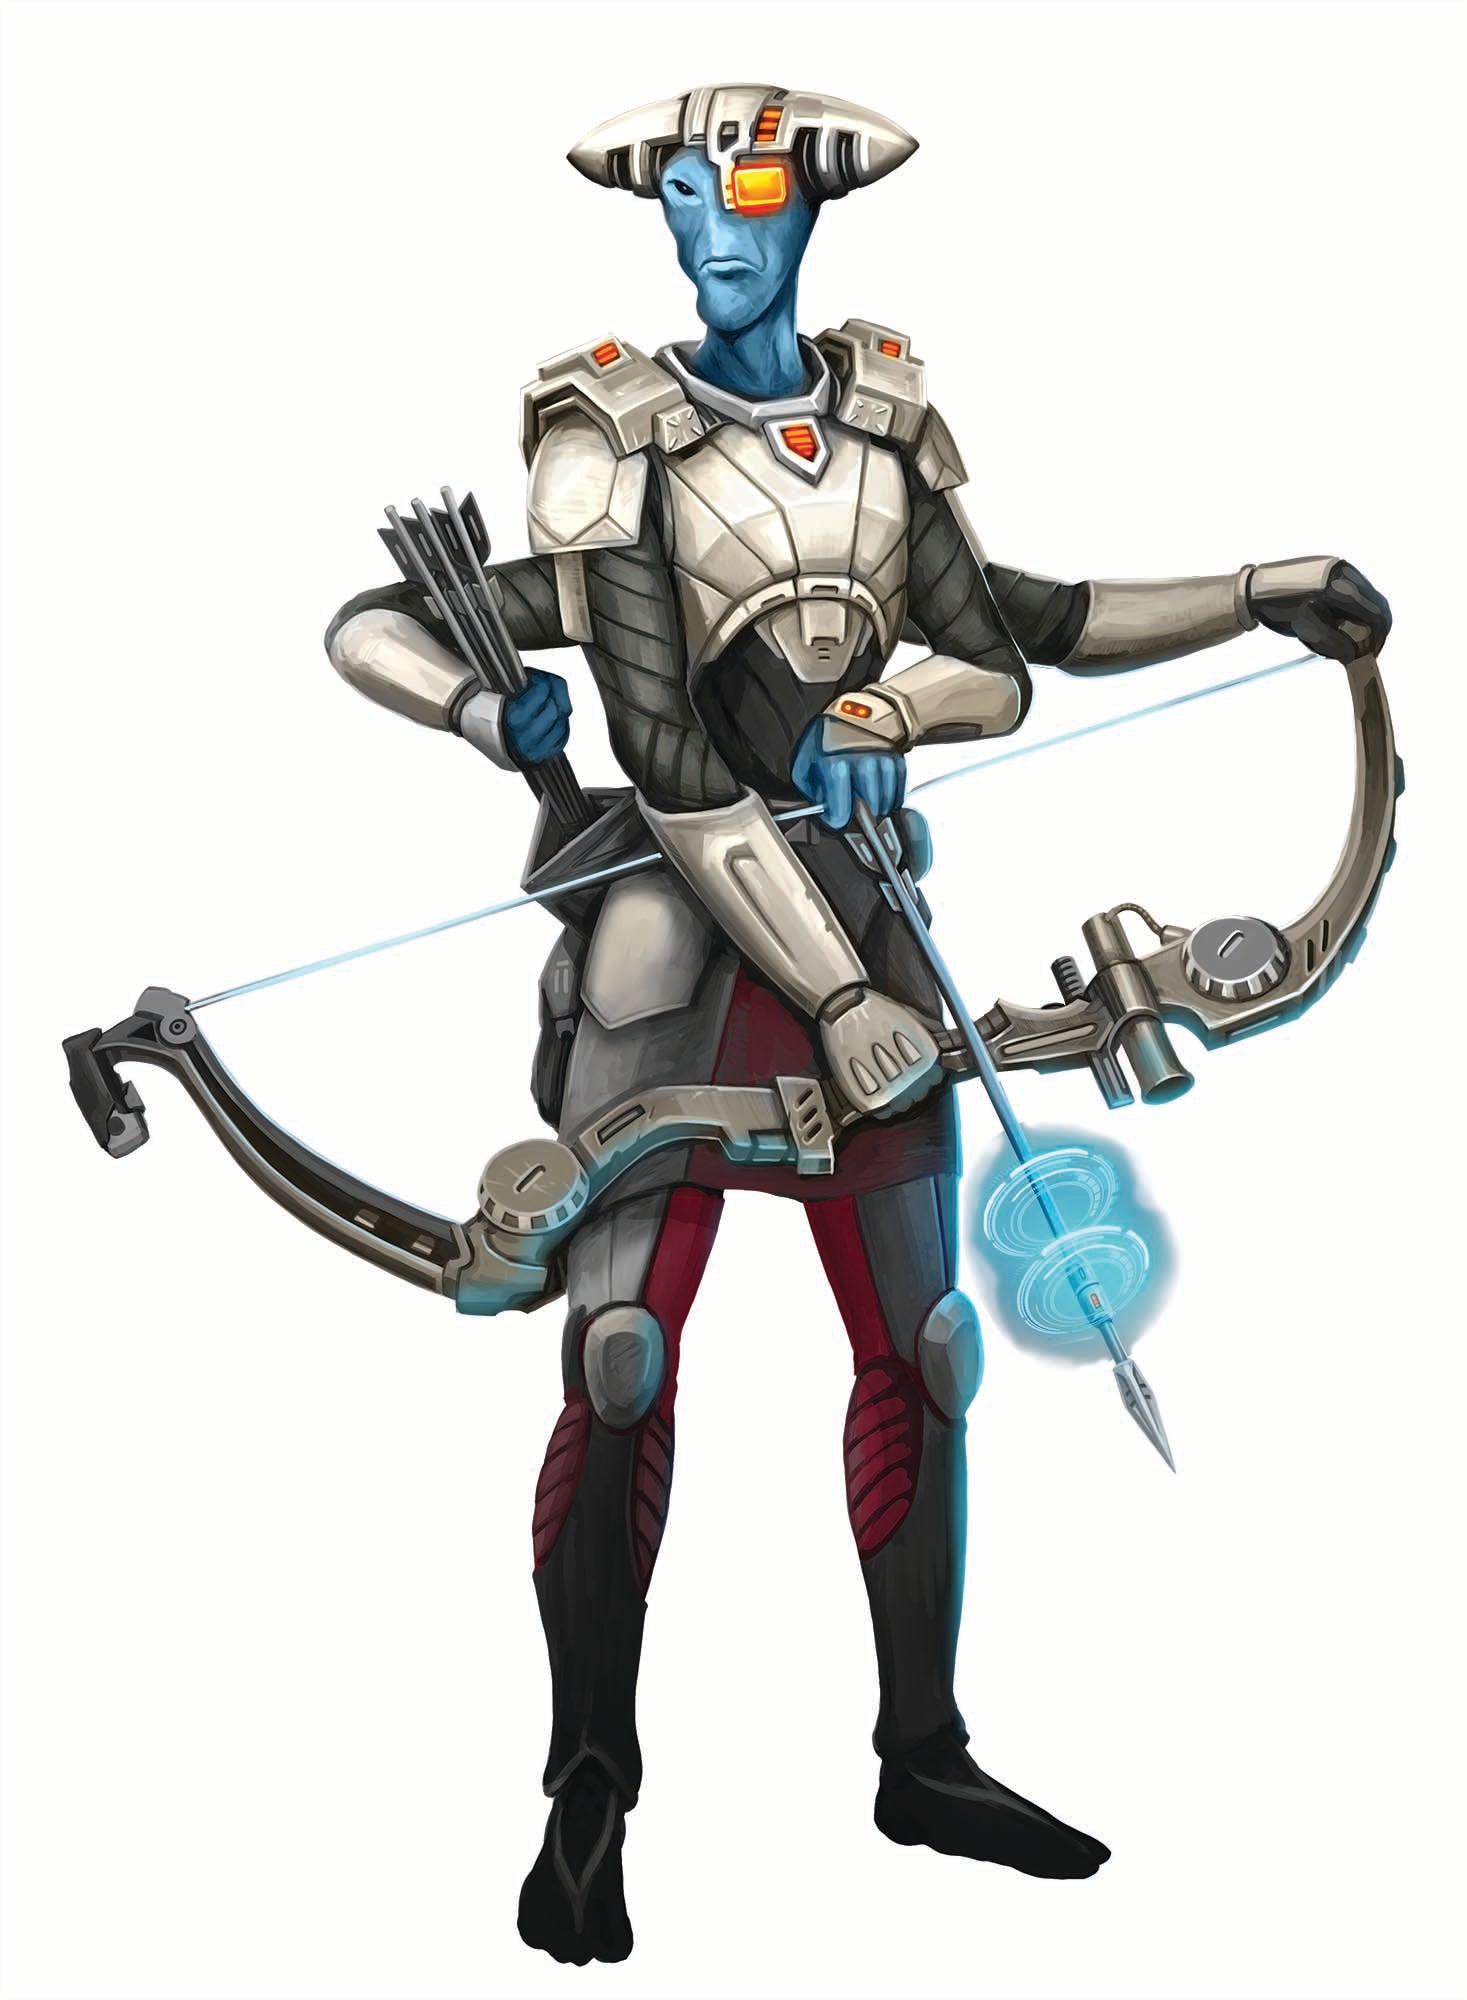 A Worlanisi Archer, a blue skinned alien wearing light grey armor wielding a bow and arrows